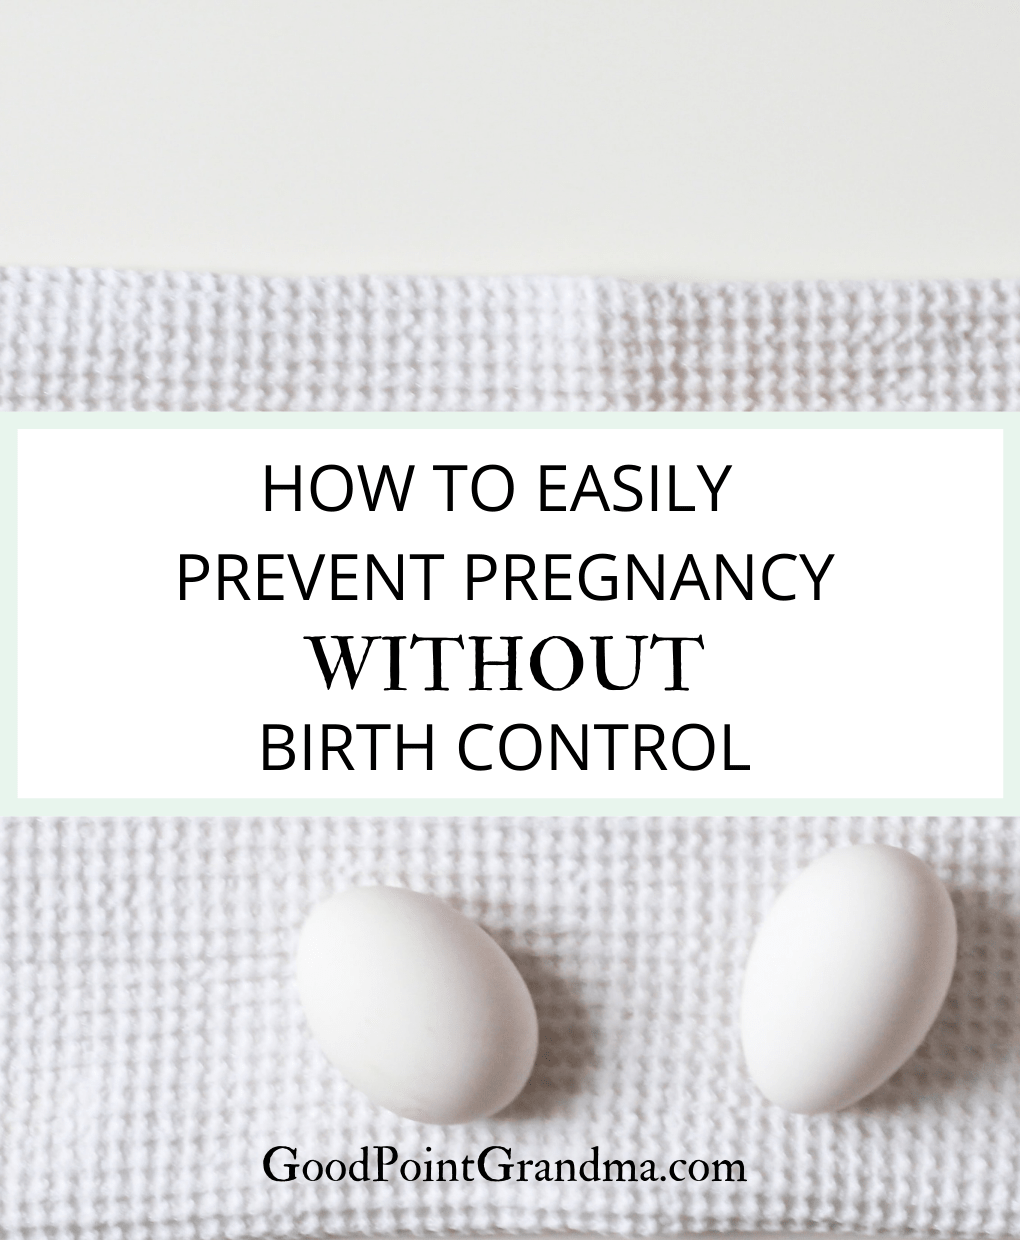 How To Easily Prevent Pregnancy Without Birth Control